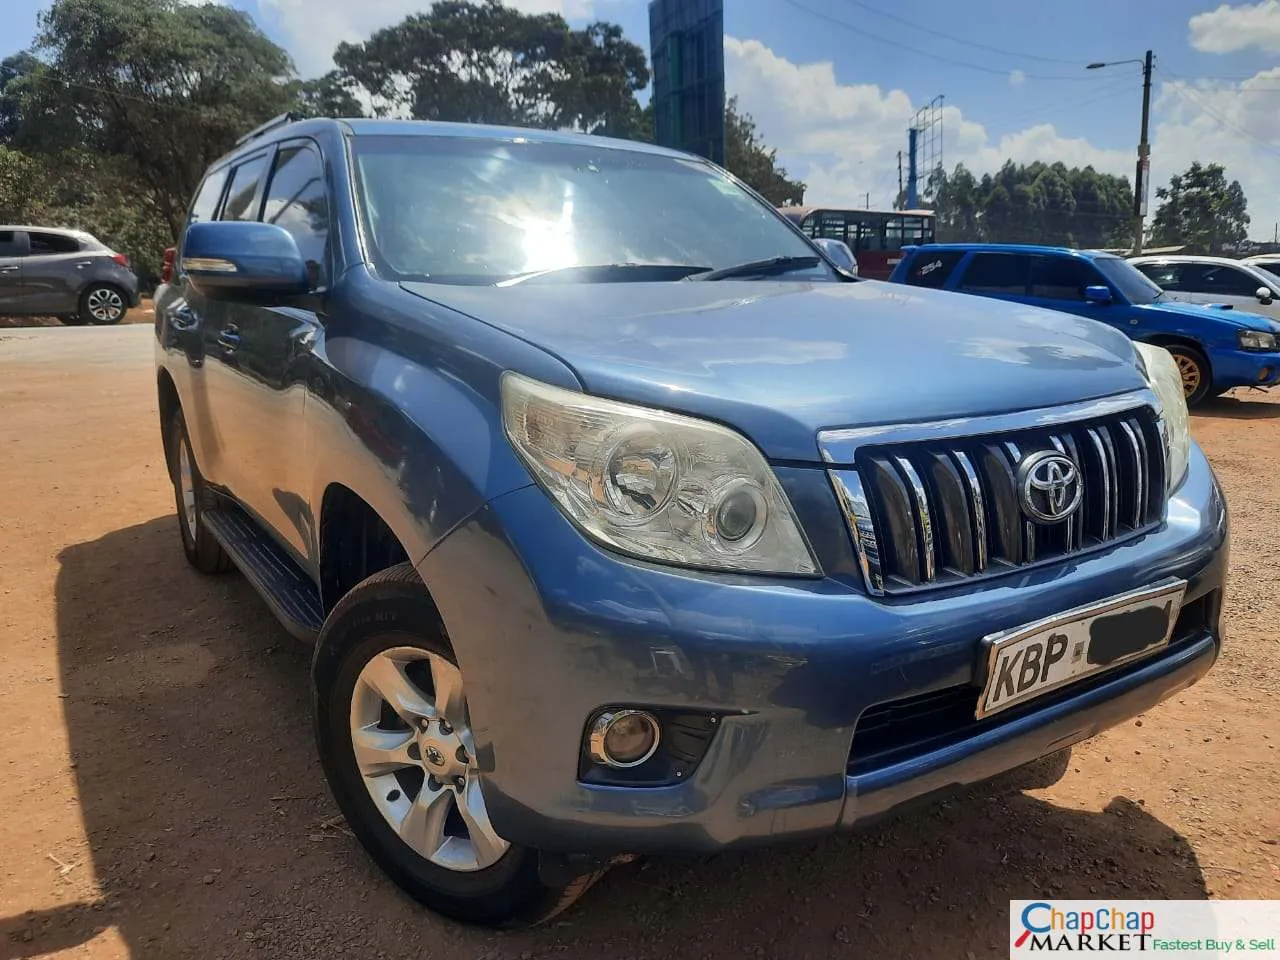 Toyota Prado j150 local 2.9M with SUNROOF You Pay 30% Deposit Trade in OK Prado for sale in kenya hire purchase installments